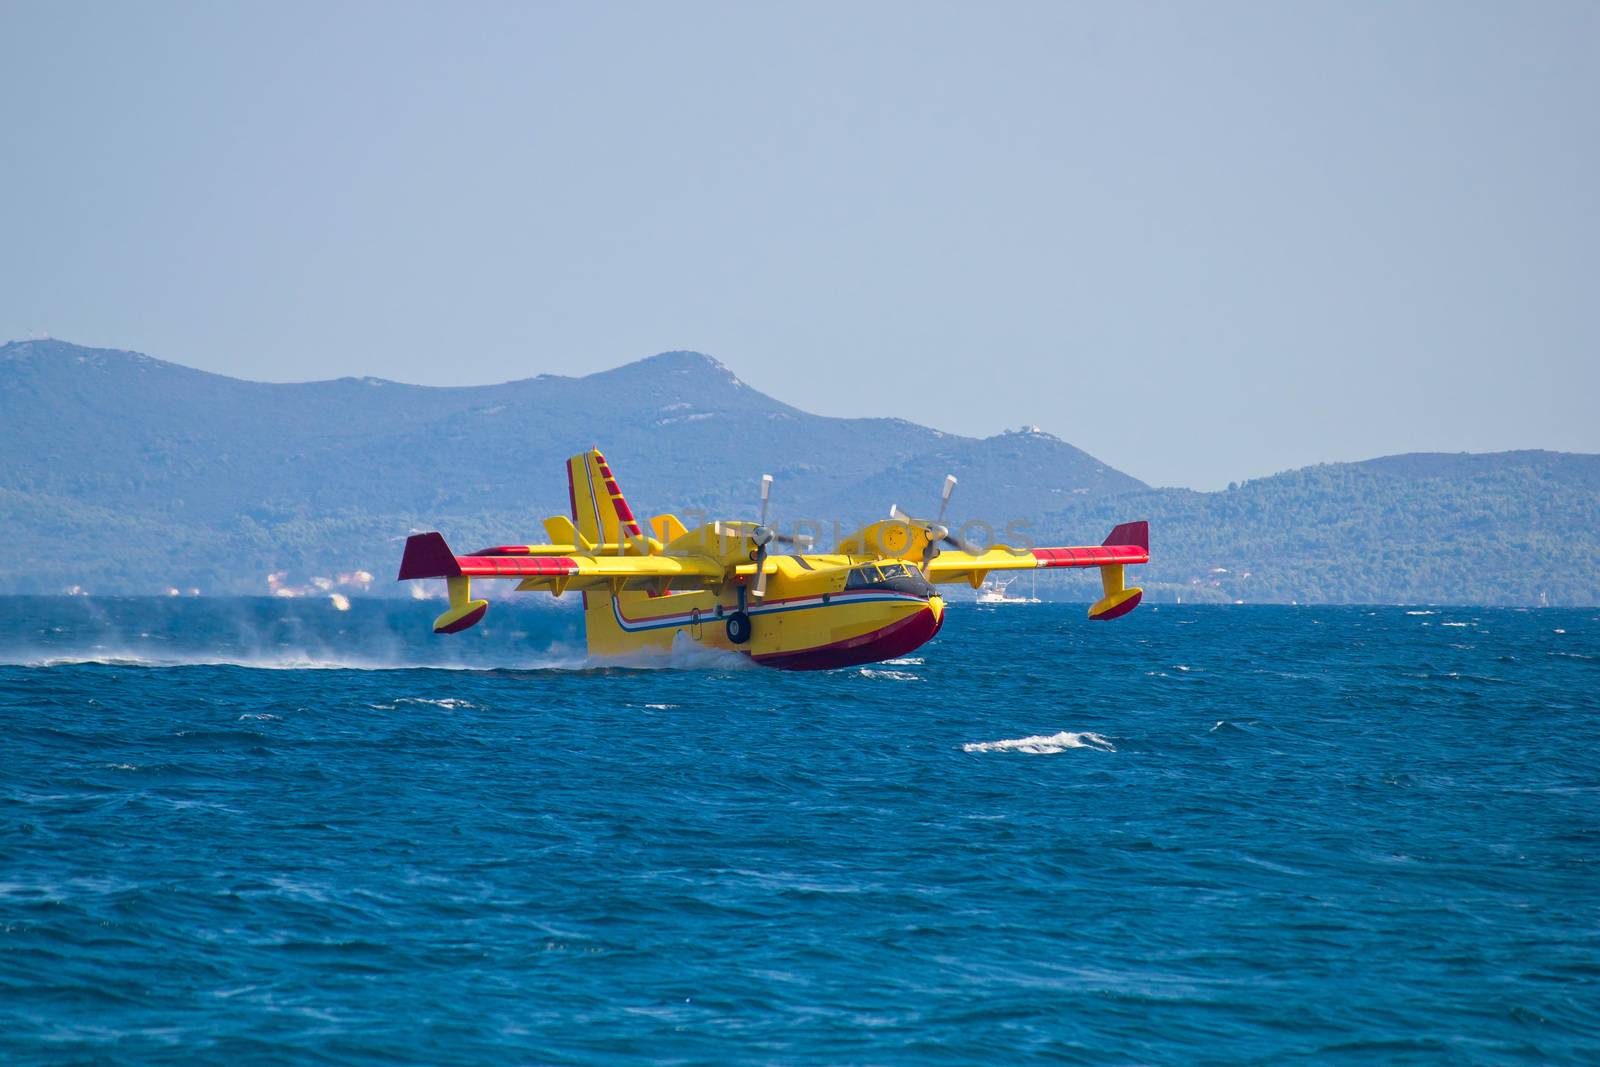 Firefighting airplane taking water from sea by xbrchx